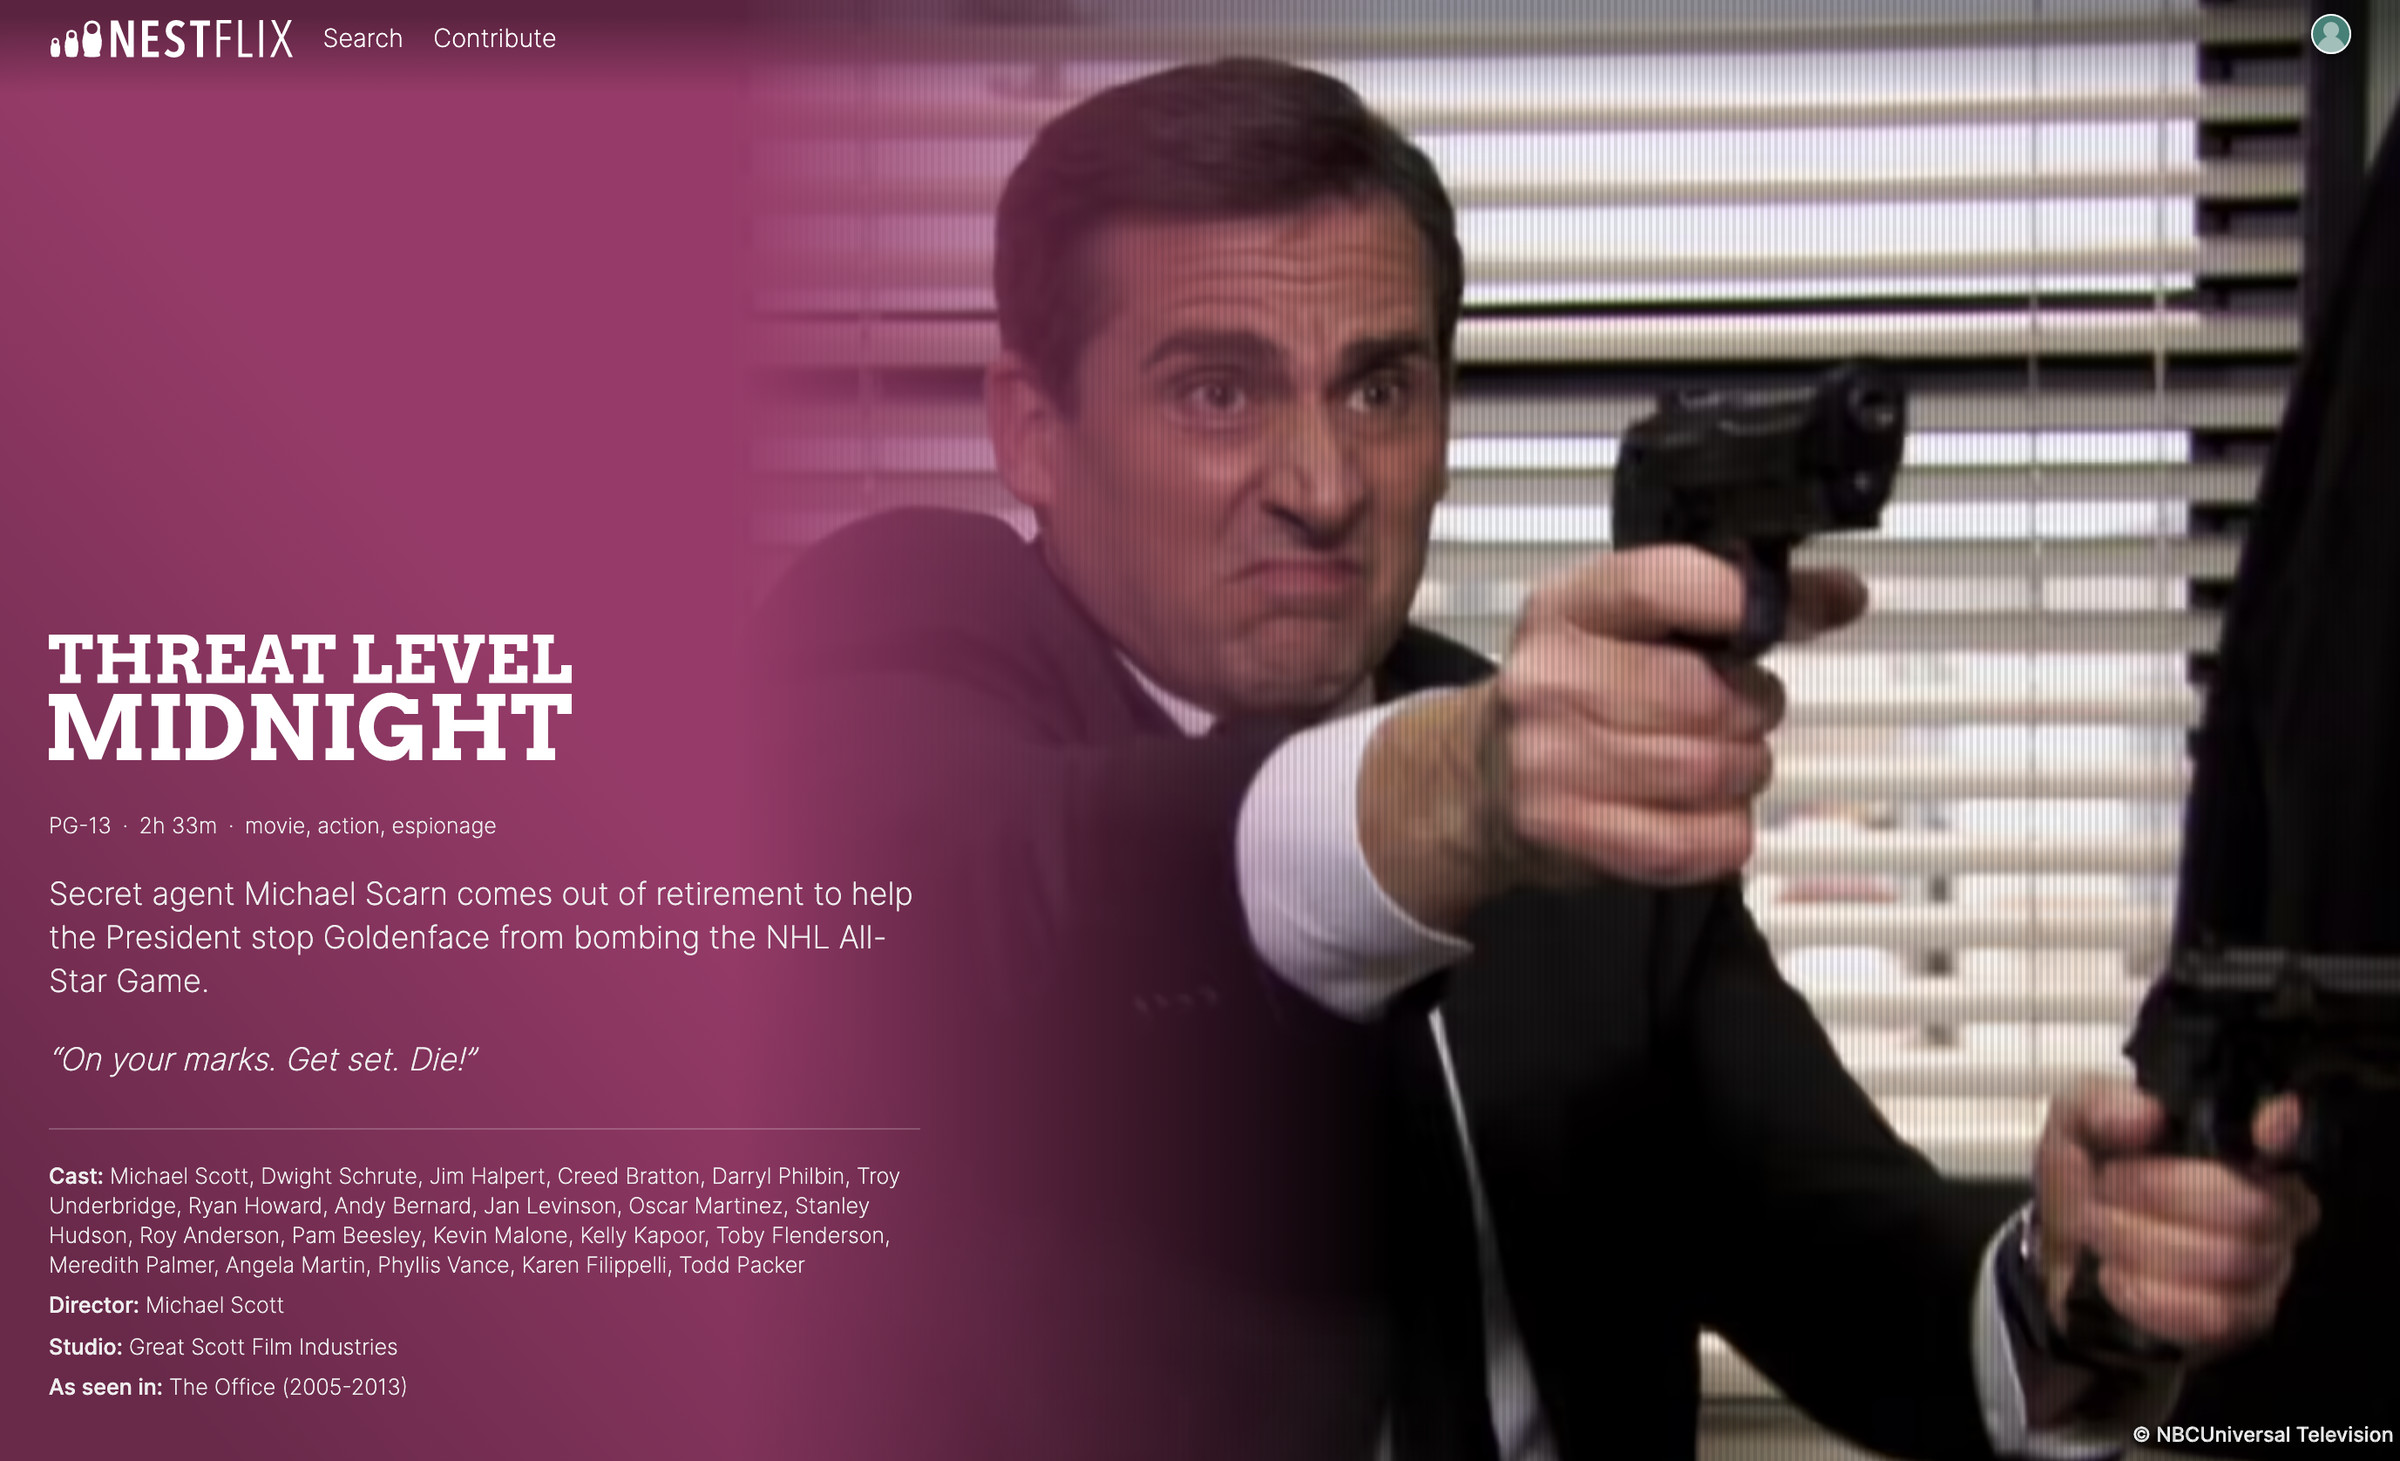 Nestflix even has room for independent entries, like “Threat Level Midnight.”